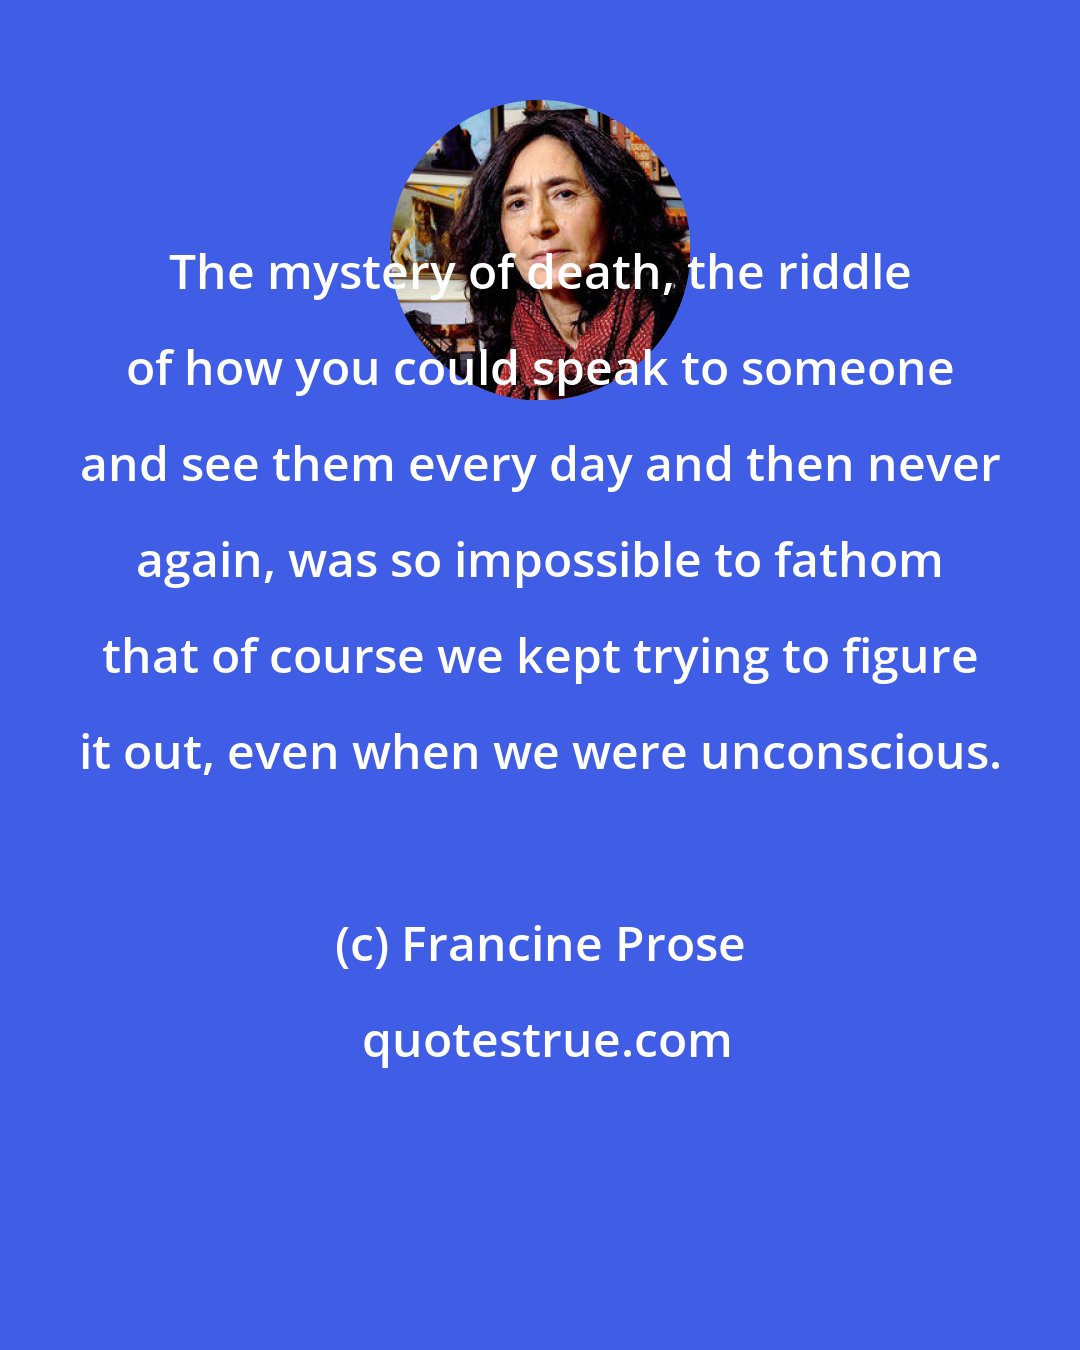 Francine Prose: The mystery of death, the riddle of how you could speak to someone and see them every day and then never again, was so impossible to fathom that of course we kept trying to figure it out, even when we were unconscious.